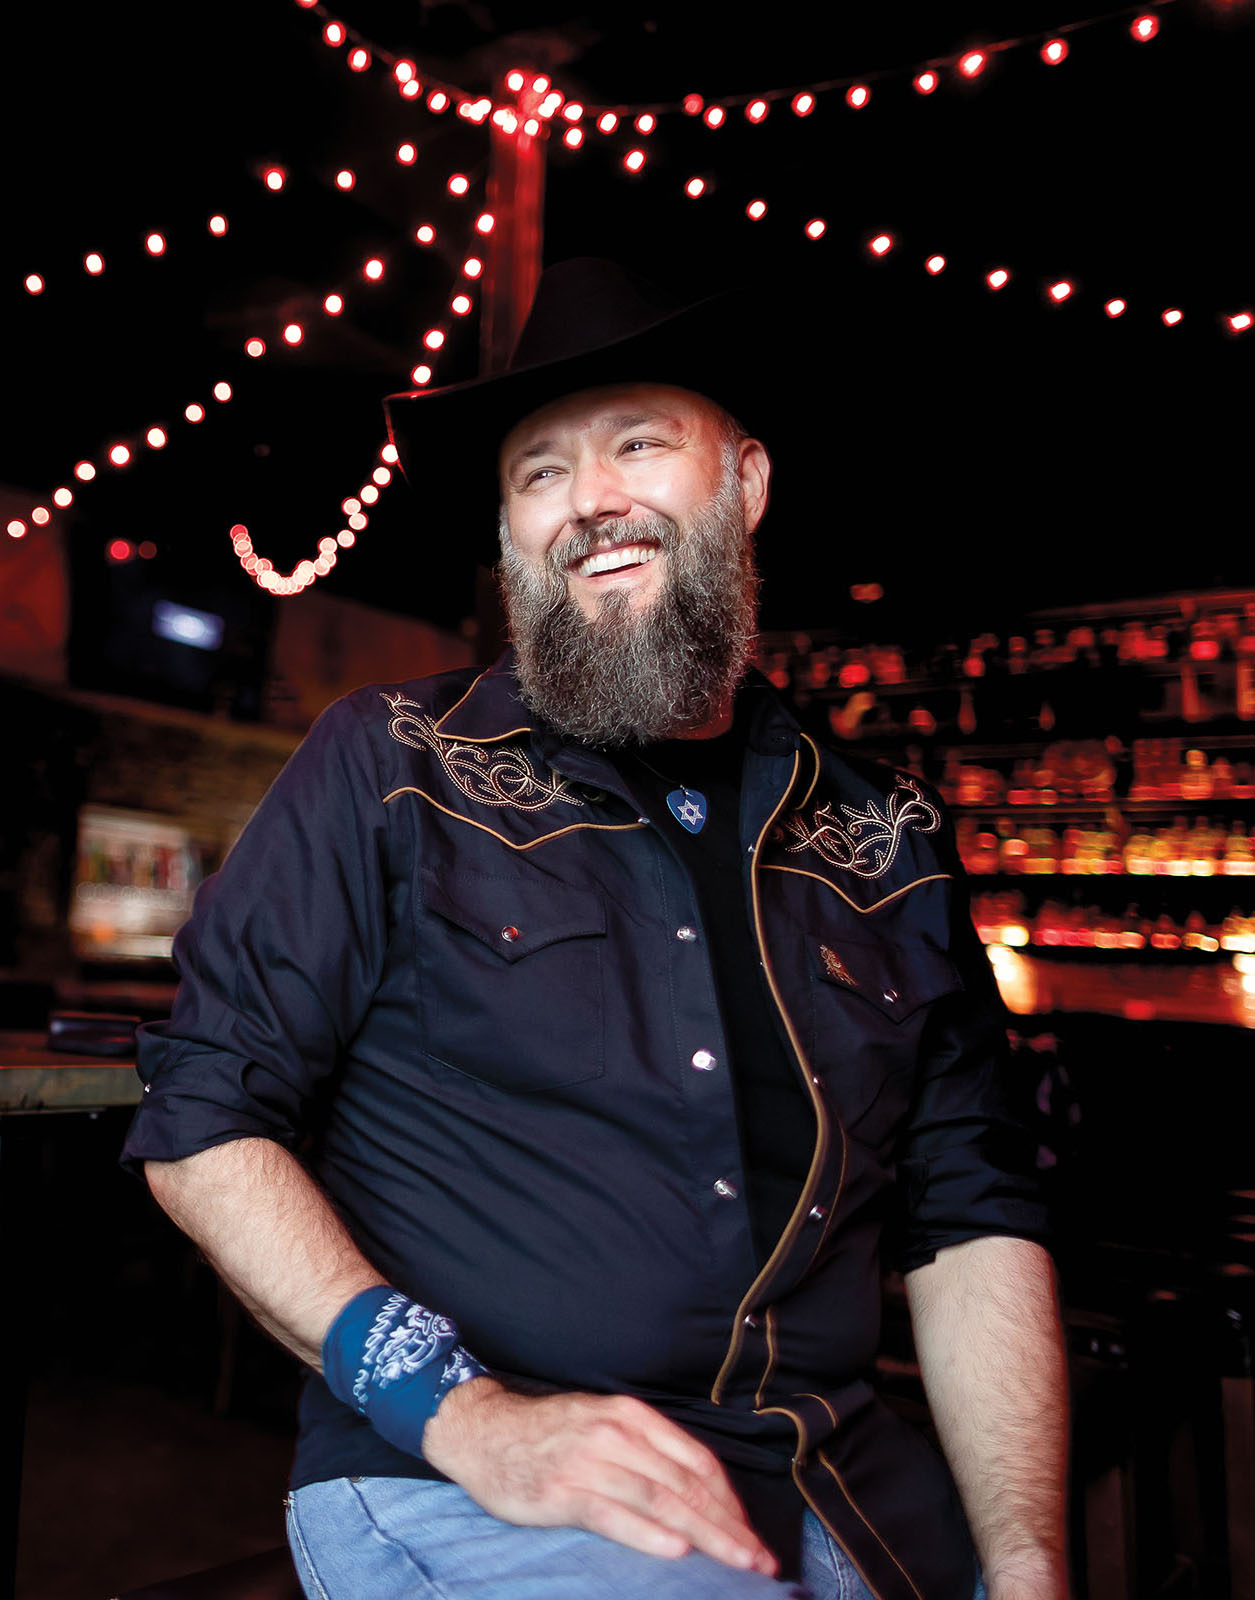 A man in a black cowboy hat and sequined shirt smiles under string lights